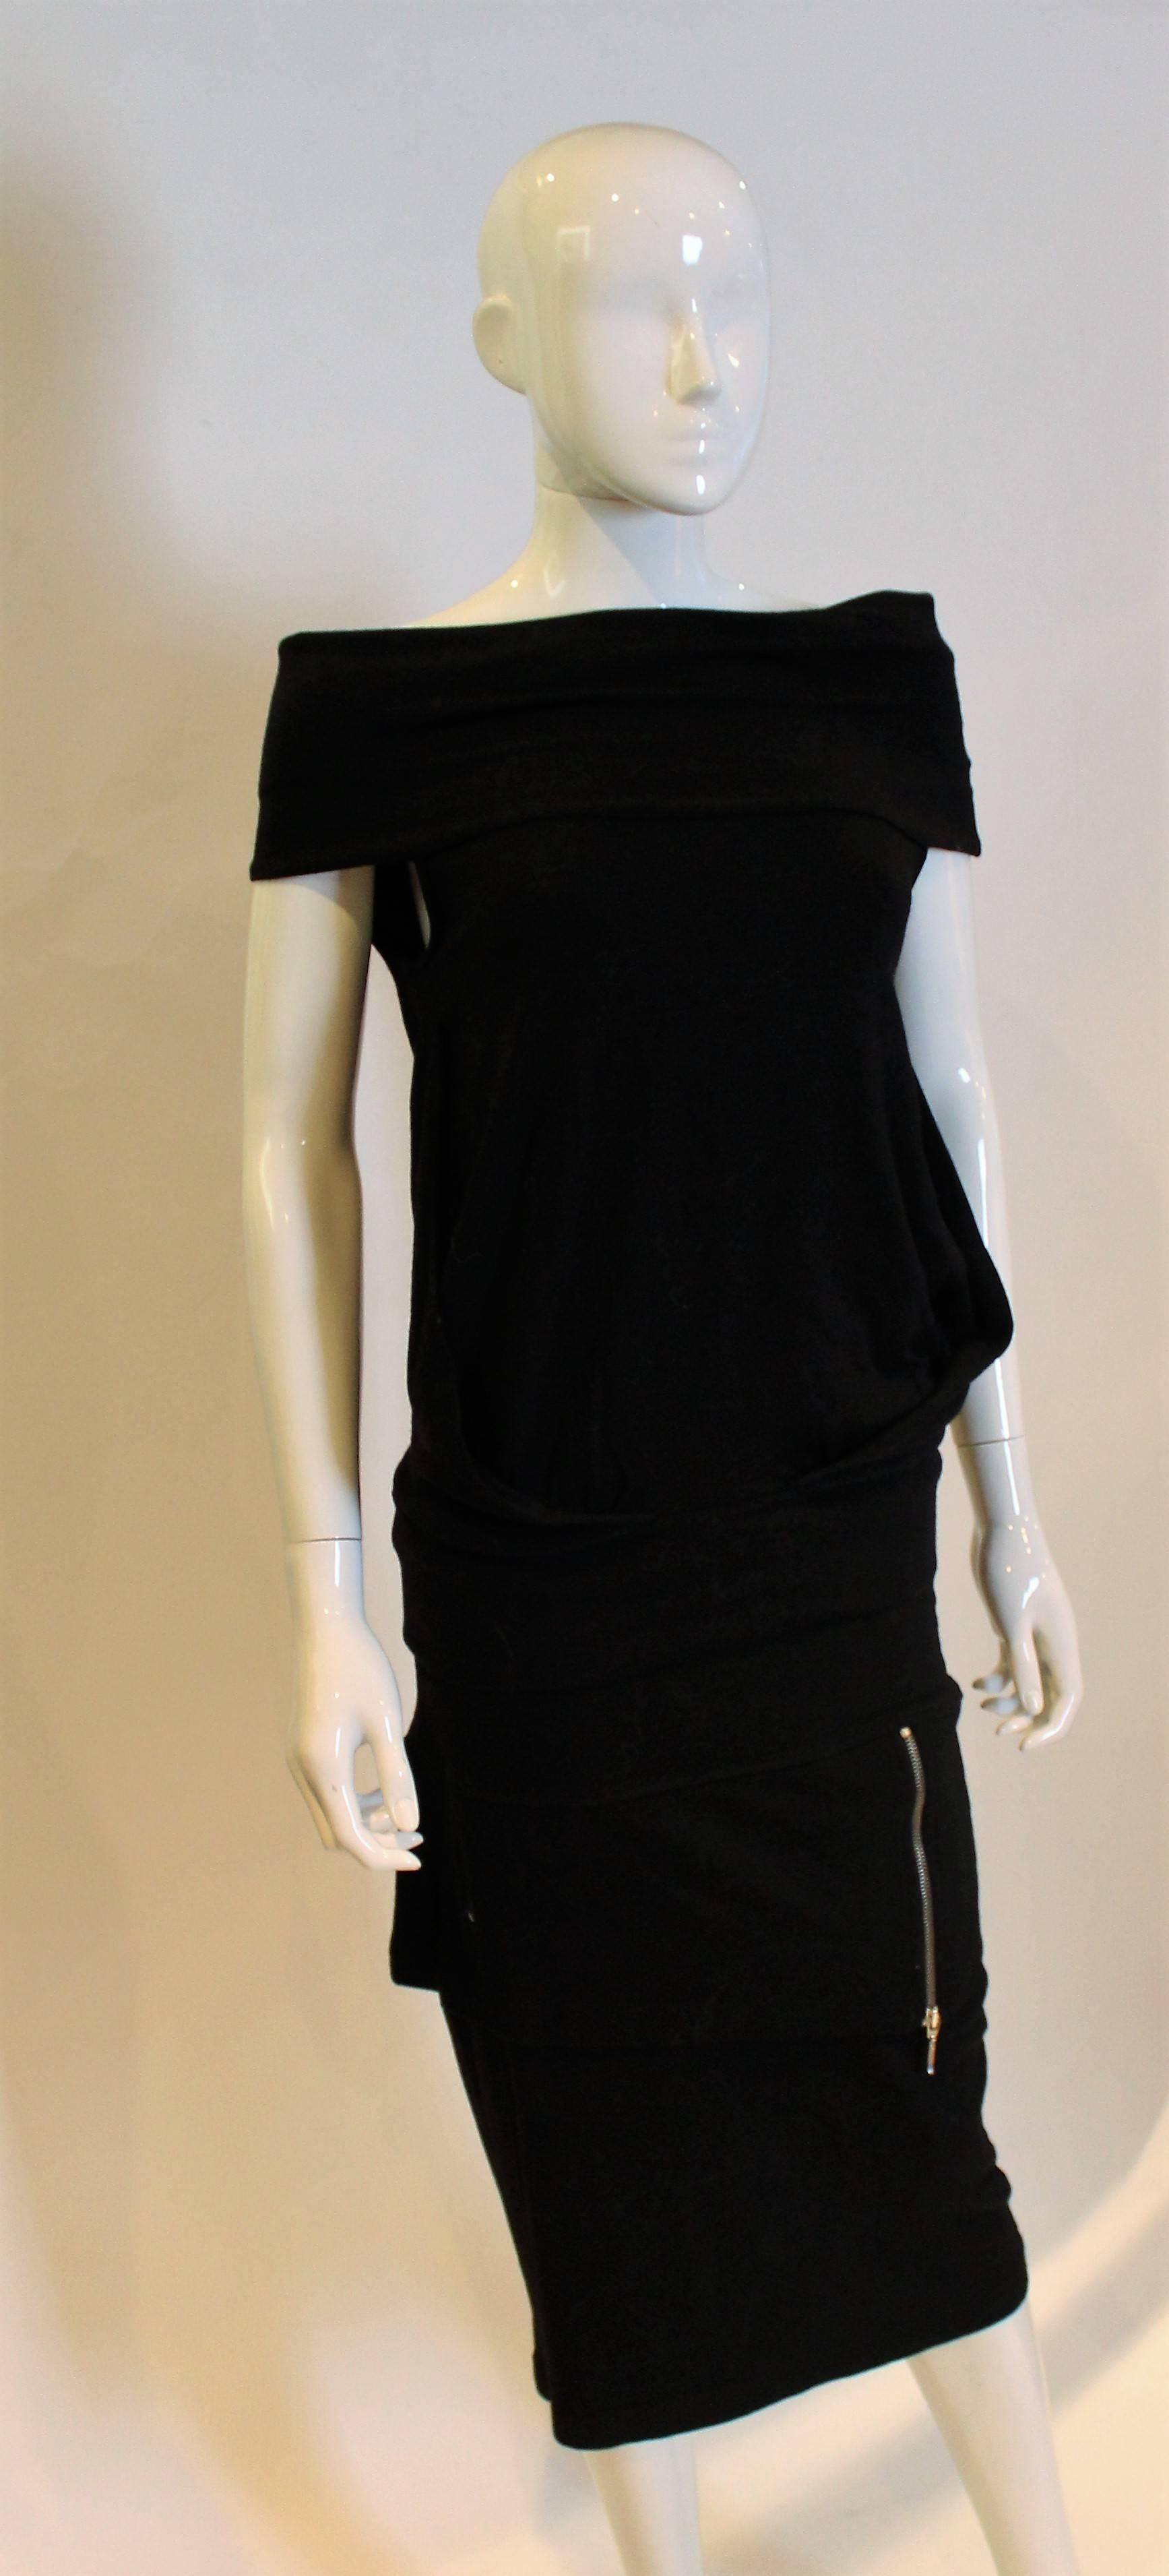 Plein Sud Black Off the Shoulder Top and Skirt 2